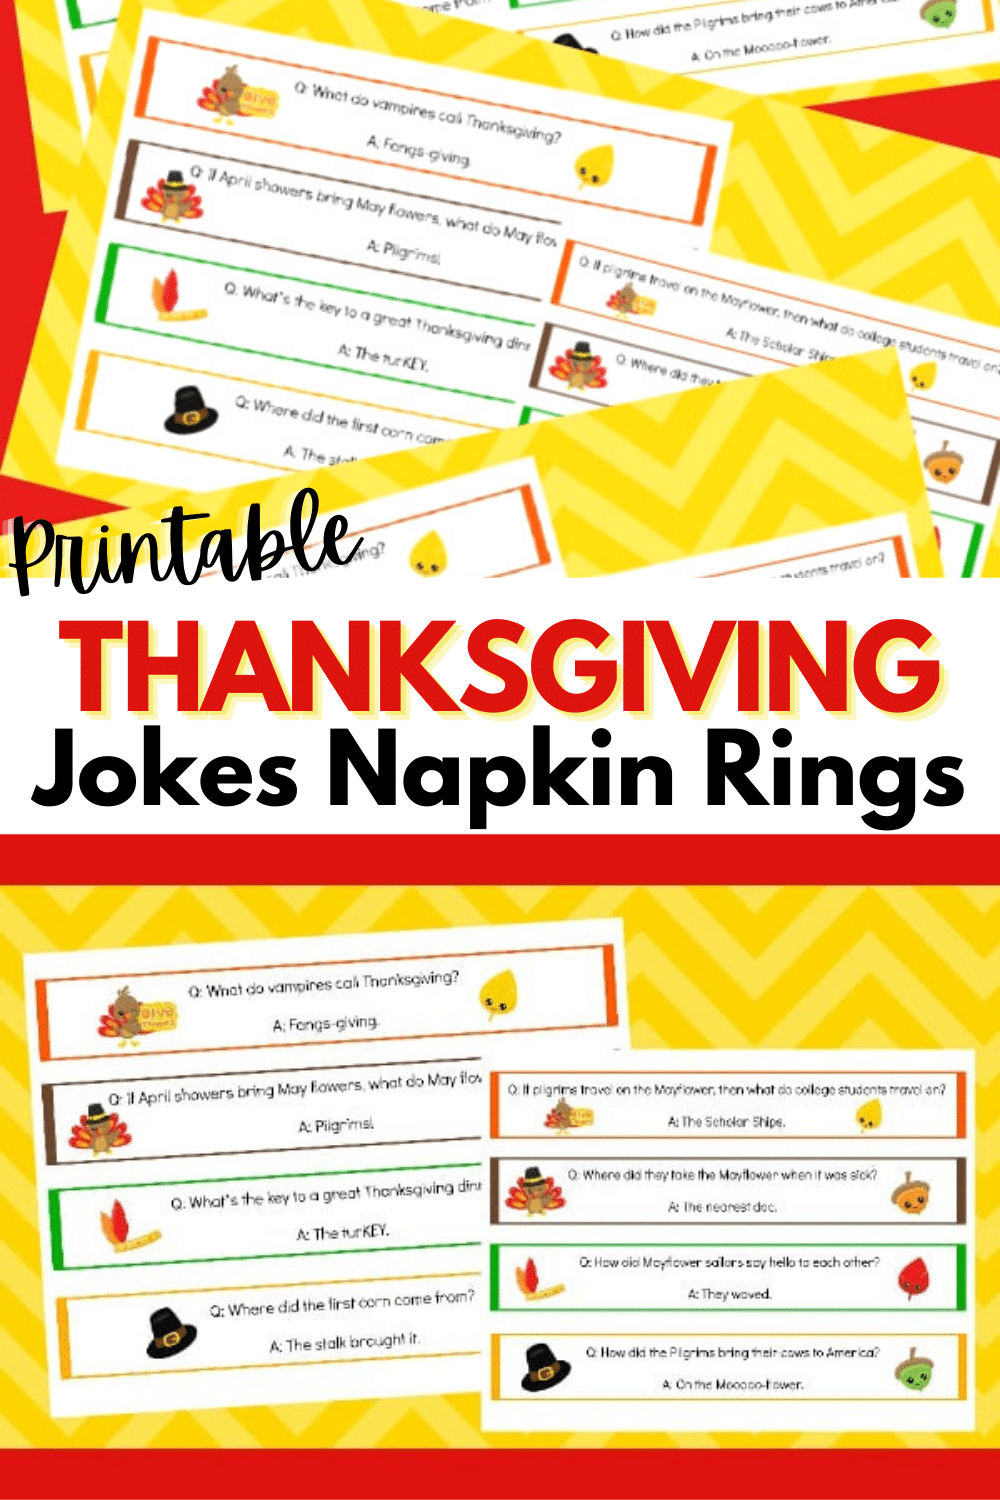 These printable Thanksgiving jokes napkin rings are an easy way to bring laughter and fun to your Thanksgiving table and kids will love to tell them! #thanksgiving #printables #Thanksgivingjokes via @wondermomwannab